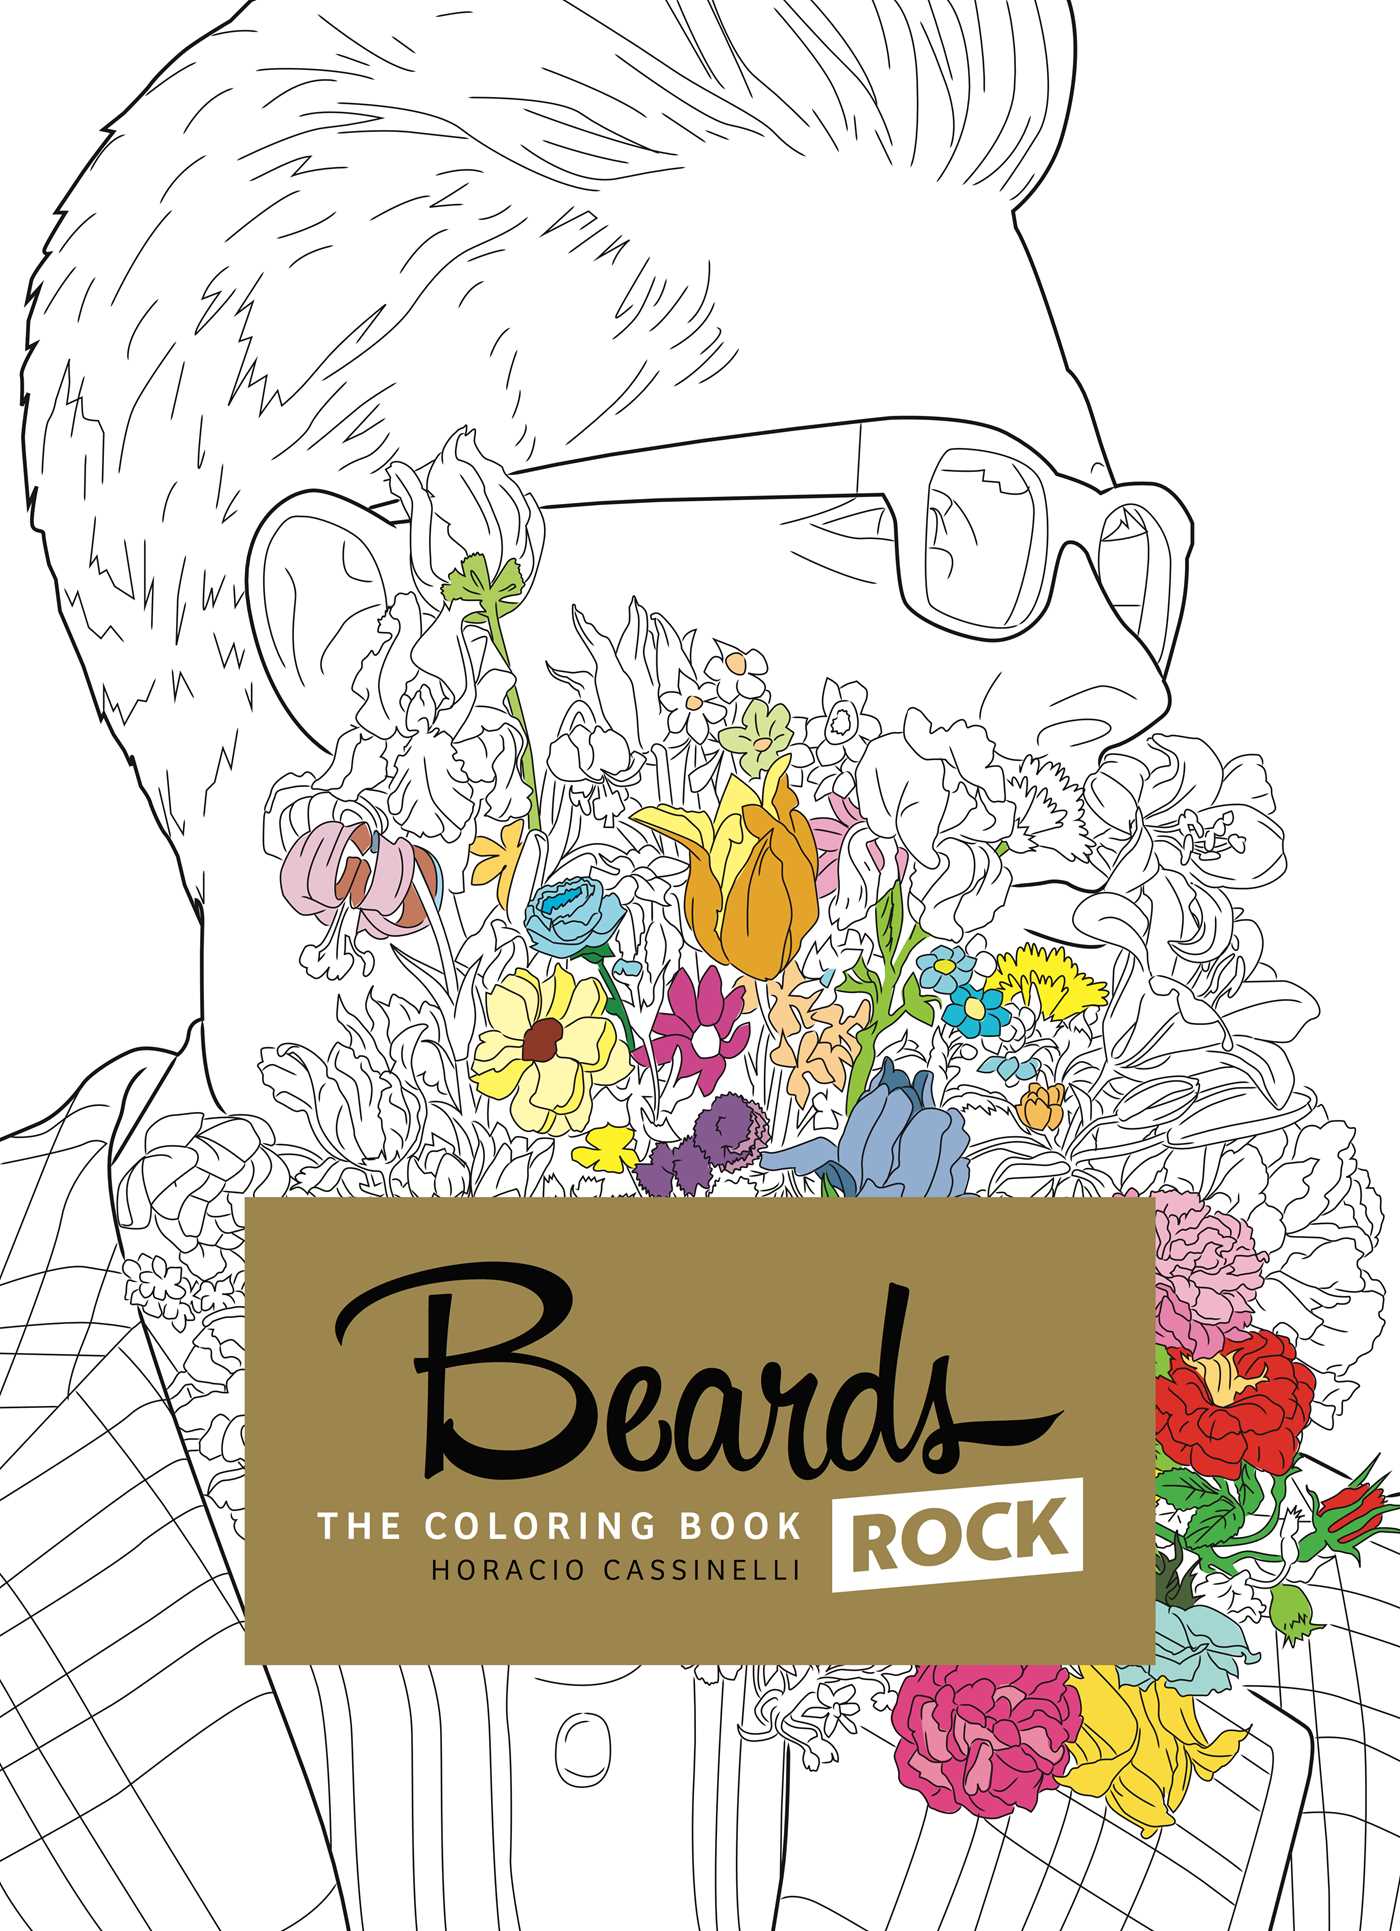 Download 14 Gorgeous Coloring Books That Make Great Gifts Off The Shelf